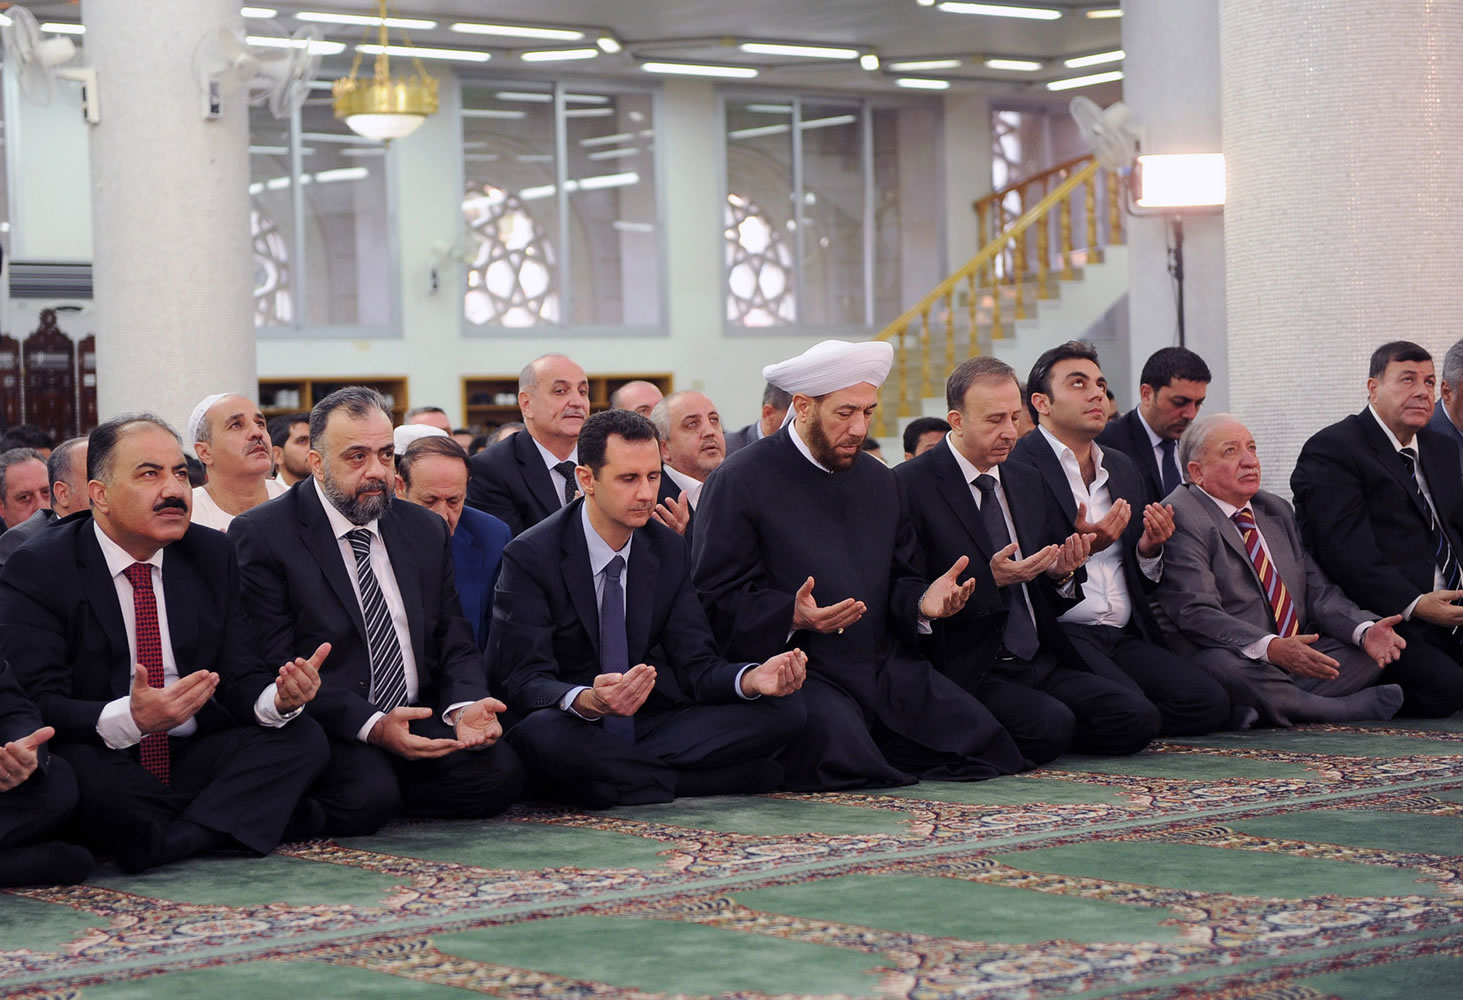 Syrian President Bashar Assad, third left, prays on the first day of Eid al-Adha at the Sayeda Hassiba mosque in Damascus, Syria, on Tuesday.